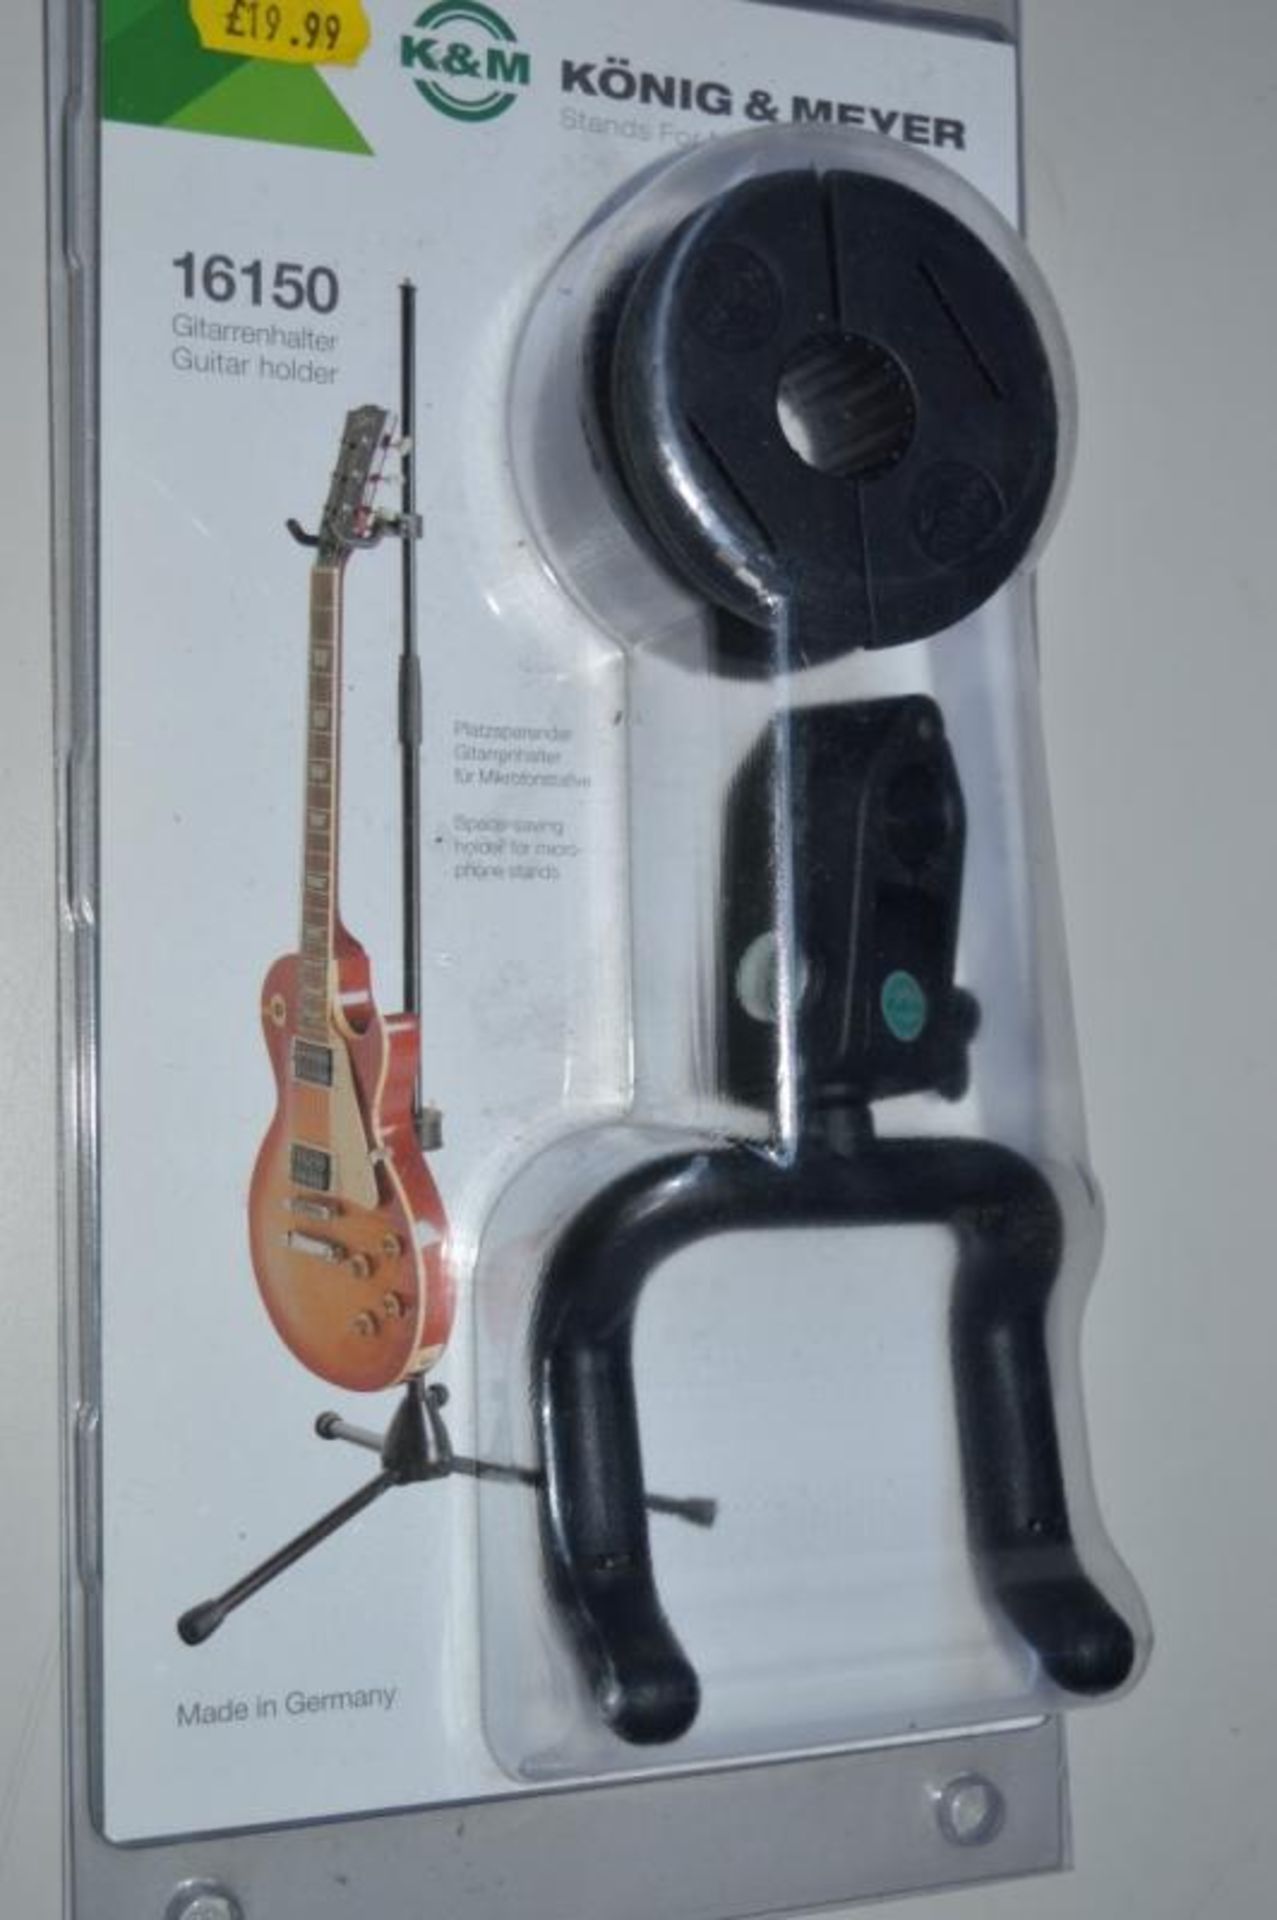 1 x Konig & Meyer Space Saving Guitar Holder - Product 16150 - Brand New in Packets - CL020 - Ref Mu